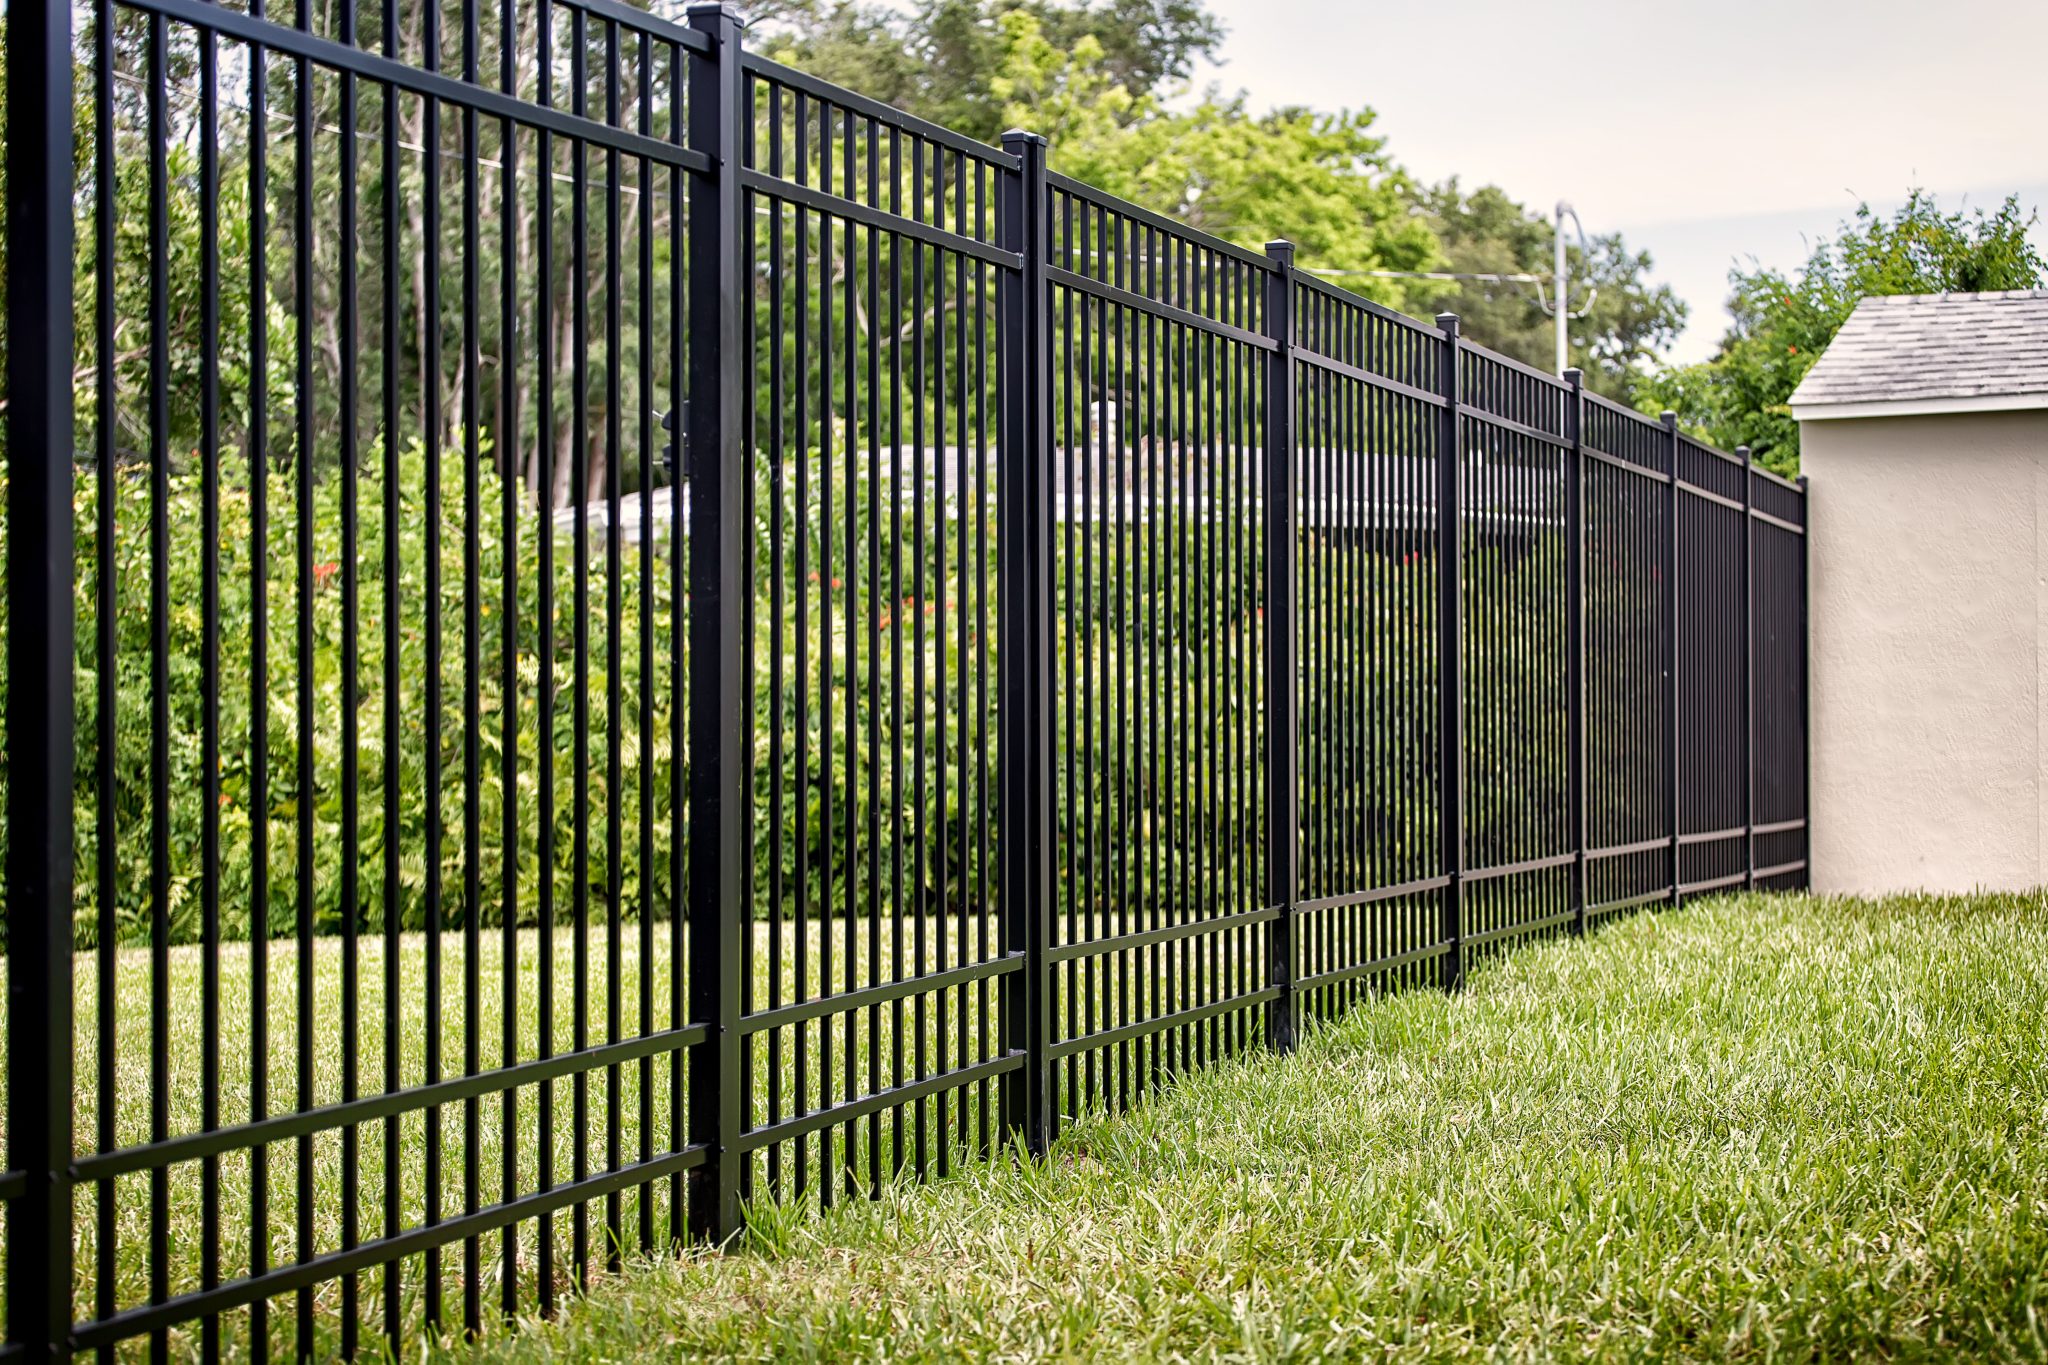 Reasons to Choose an Aluminum Fence